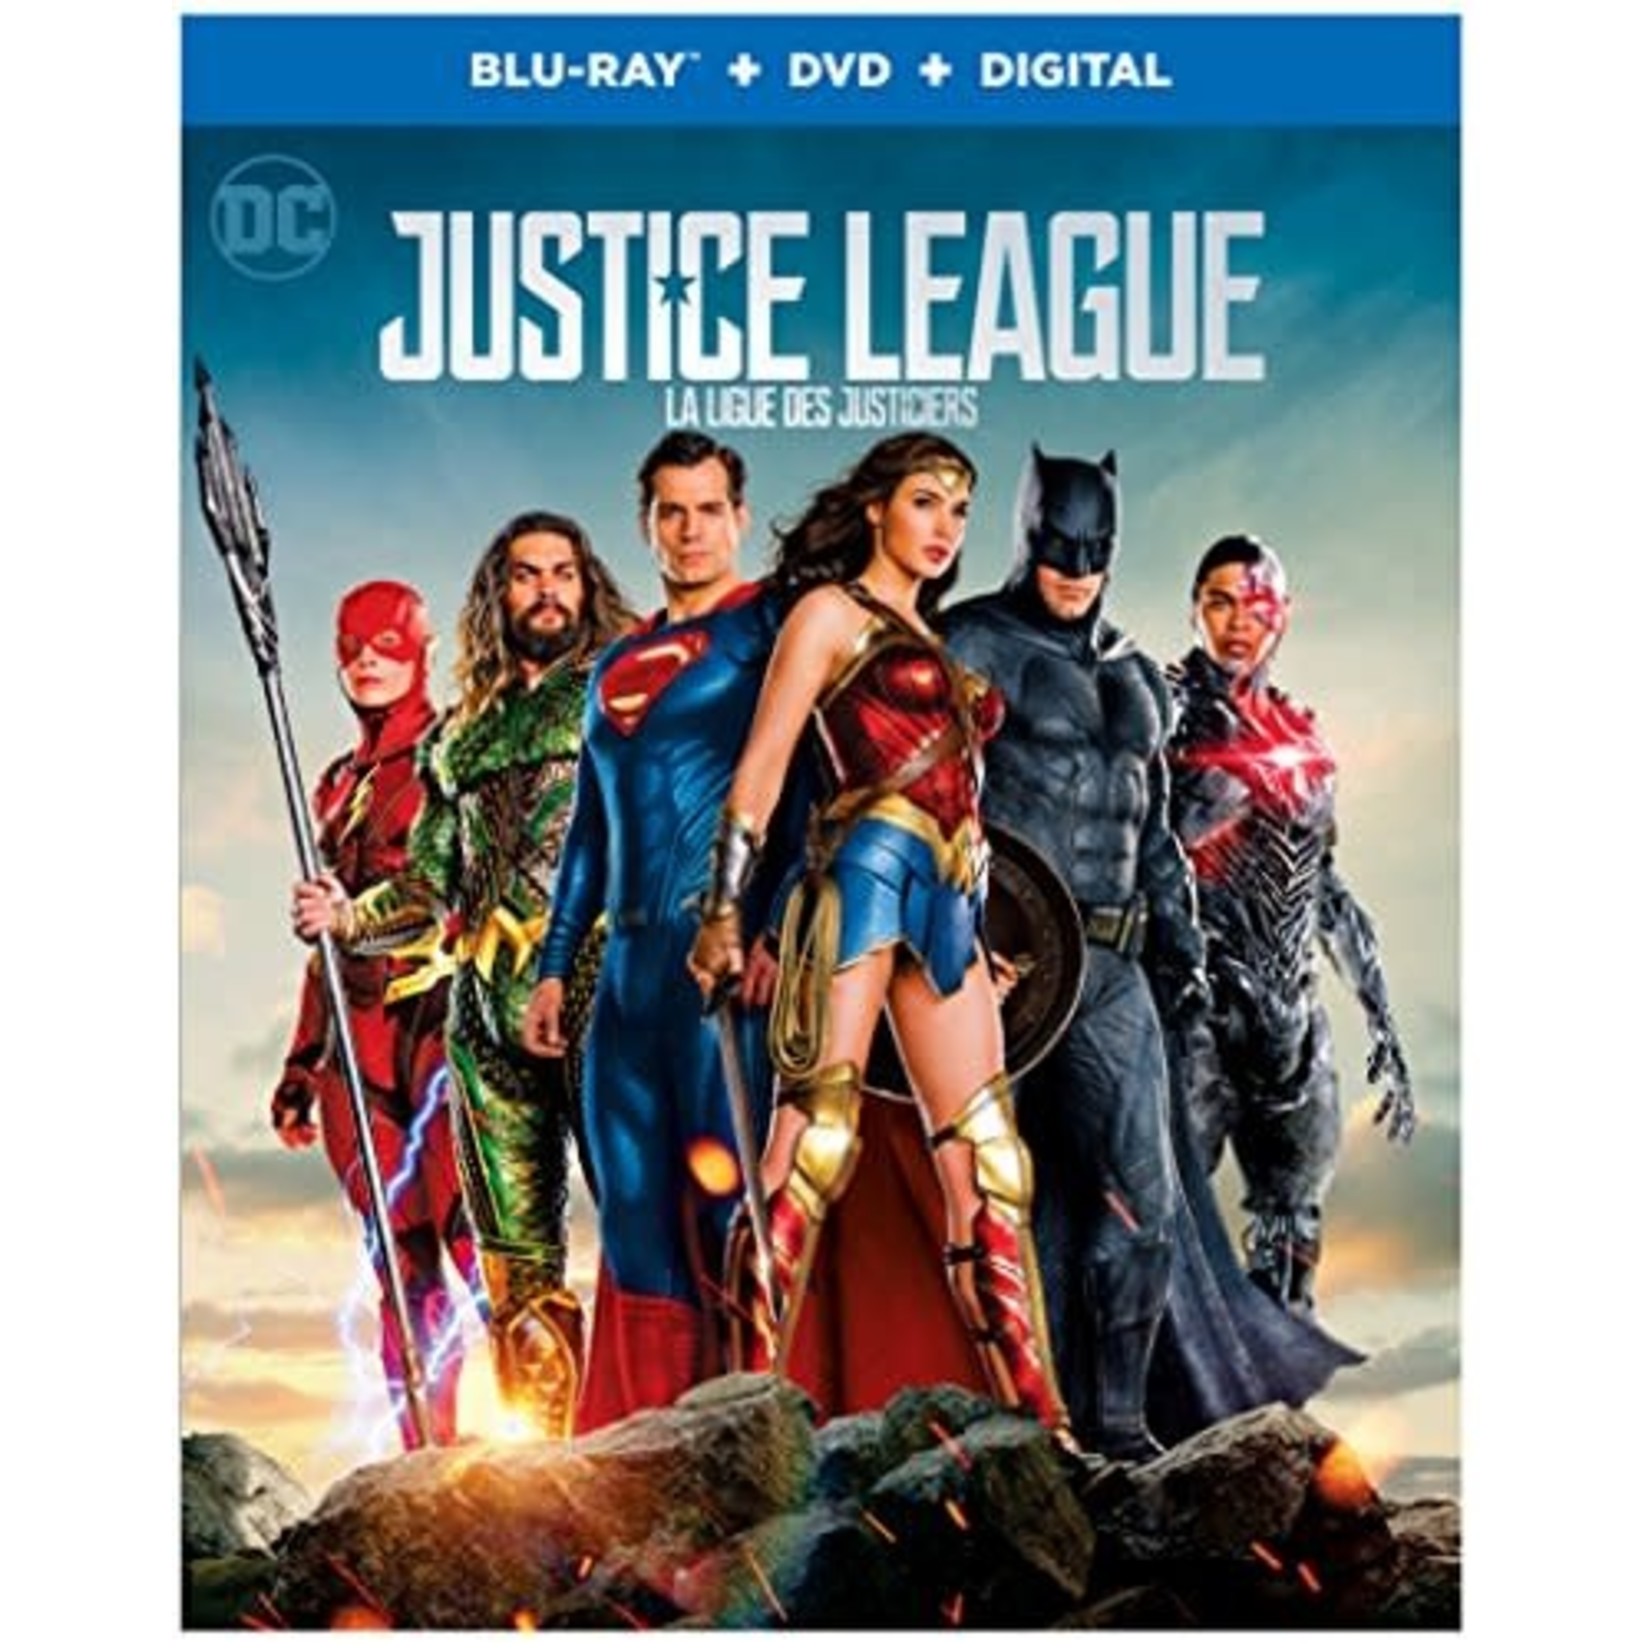 Justice League (2017) [USED BRD]